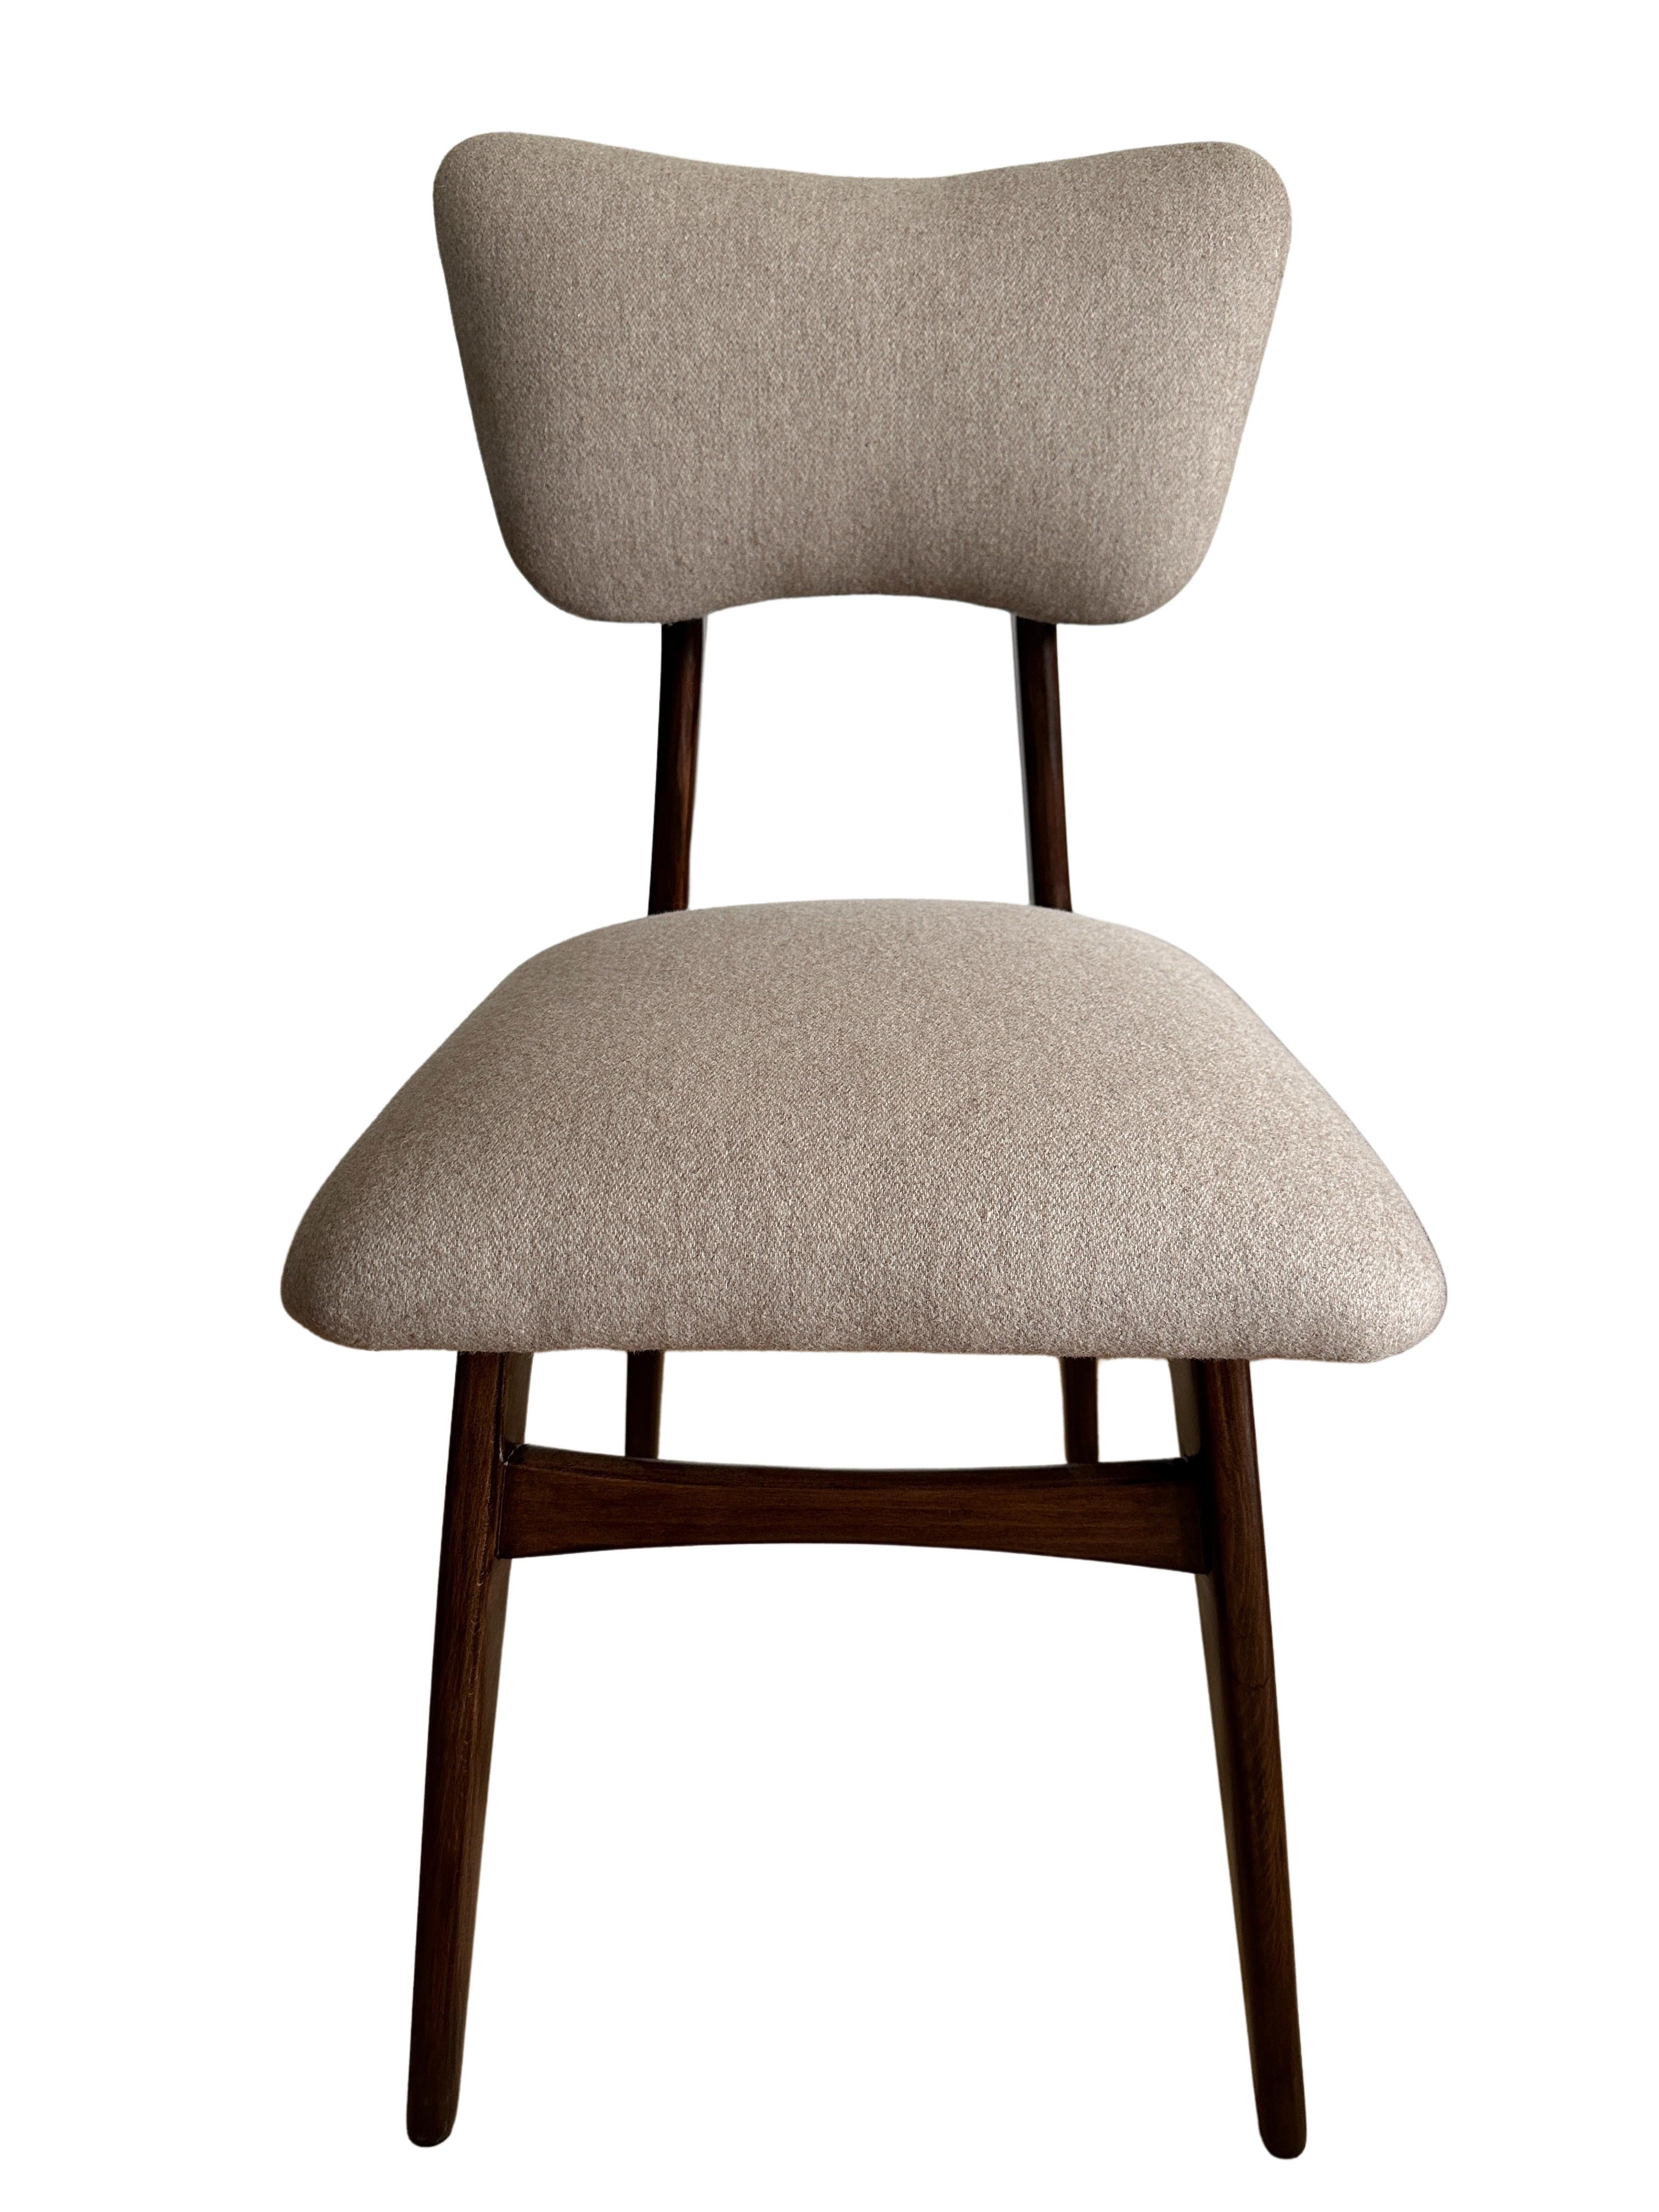 20th Century Set of Two Midcentury Dining Chairs in Beige Wool Upholstery, Poland, 1960s For Sale